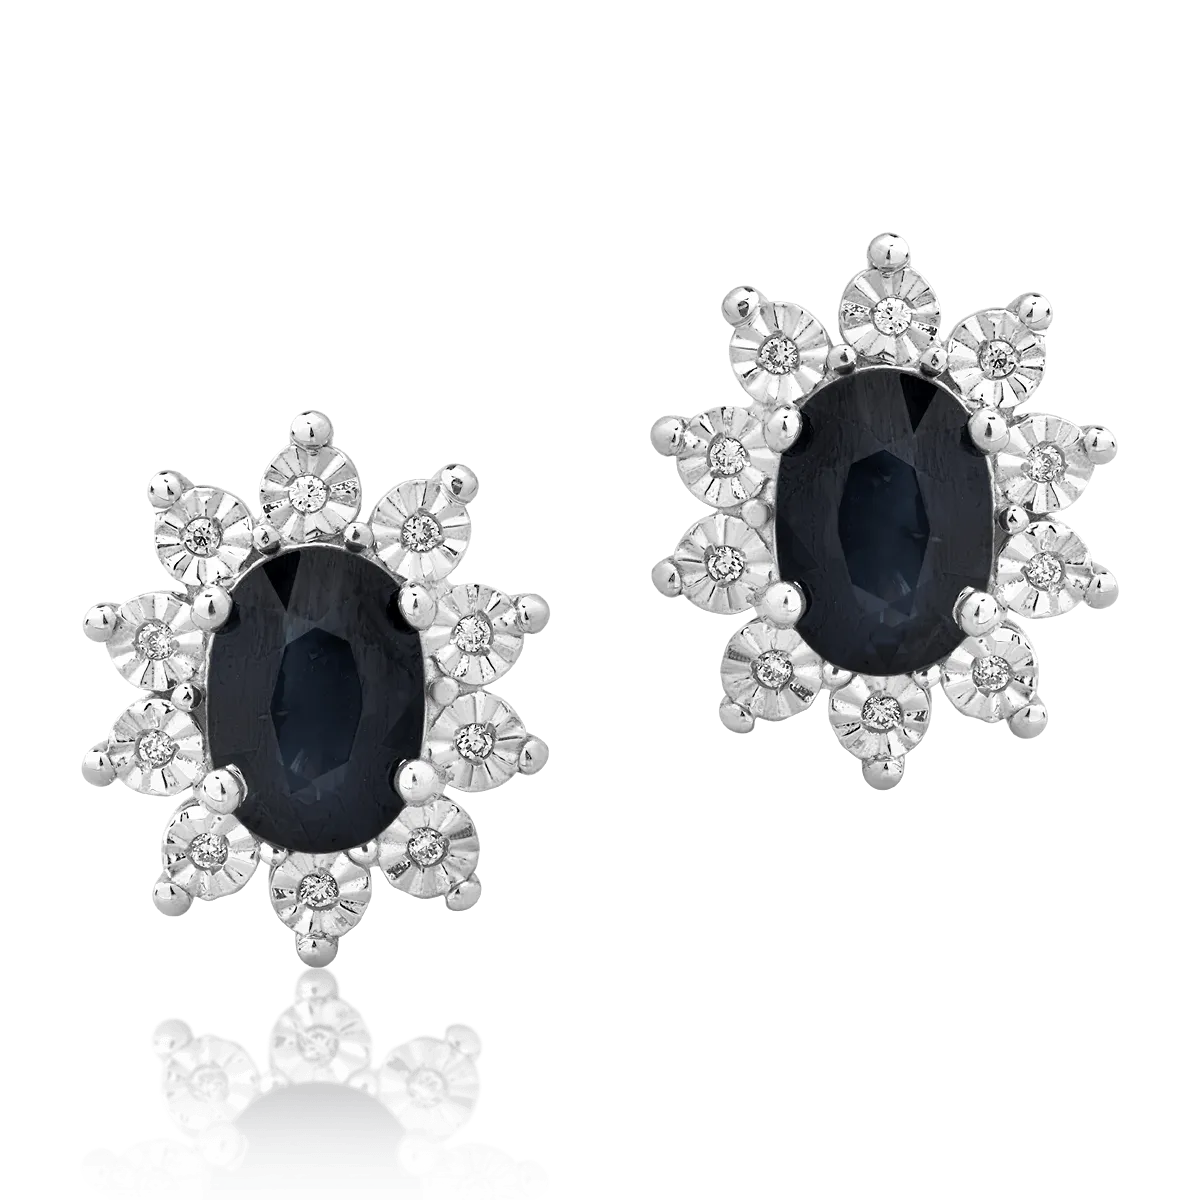 14K white gold earrings with 1.95ct sapphires and 0.05ct diamonds